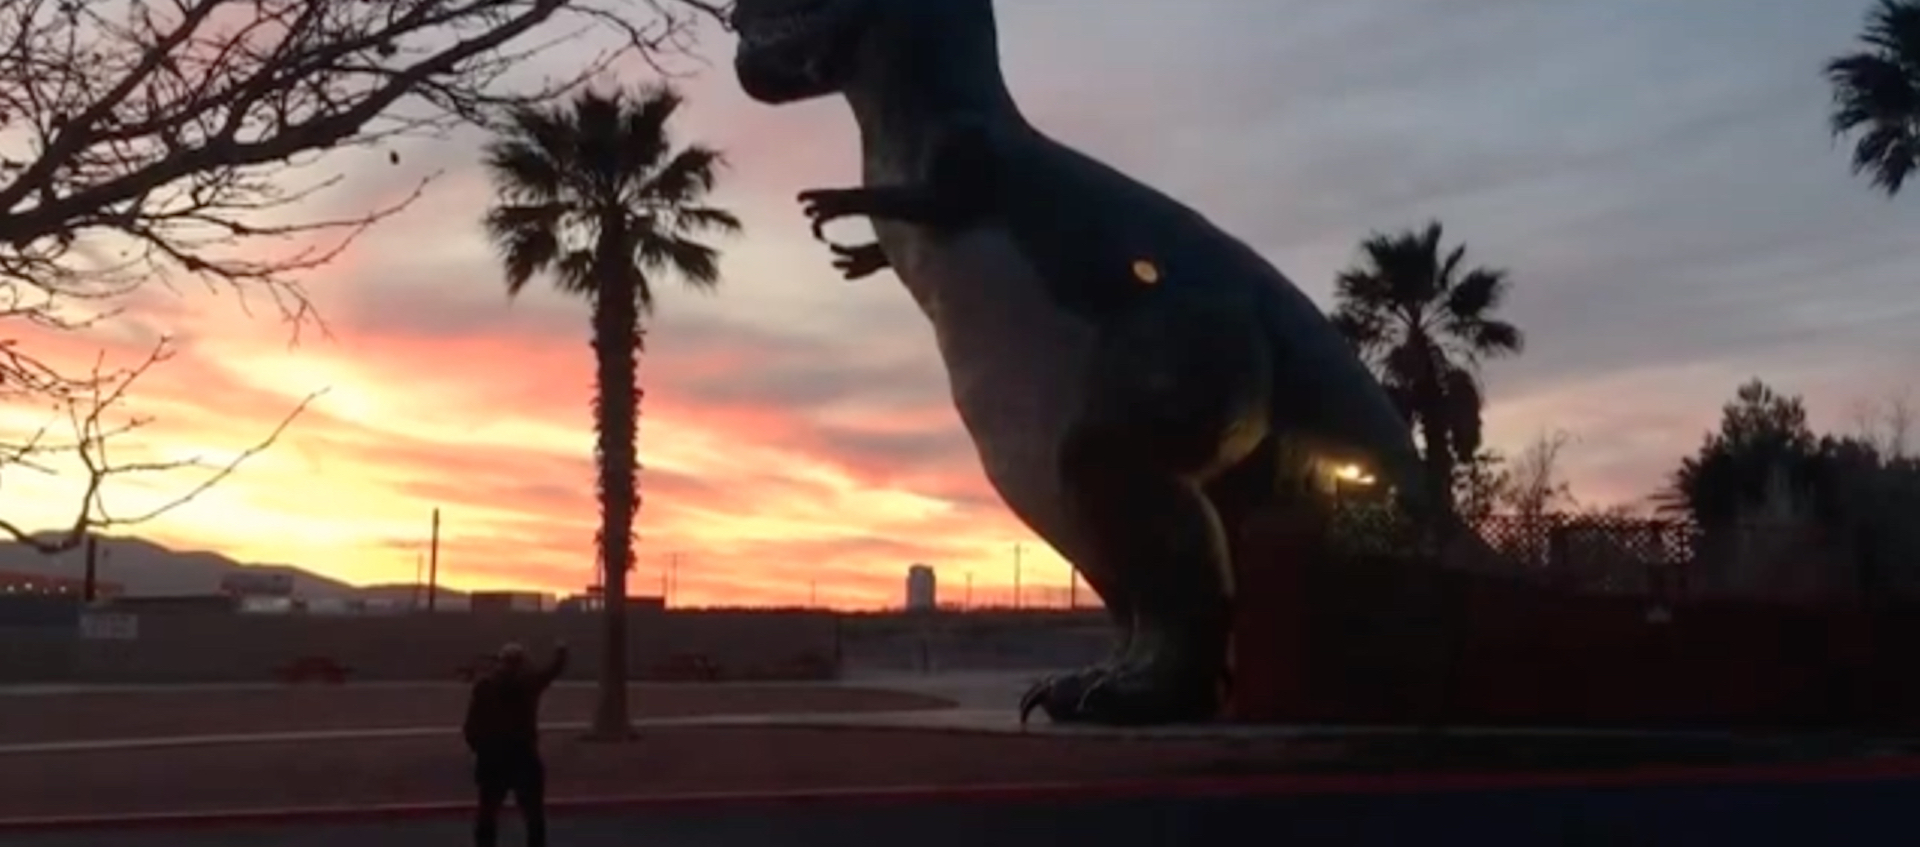 The back of Wexner Center Assistant Film/Video Curator Chris Stults as he waves goodbye to the setting sun at the California site of the Cabazon dinosaurs, for Layla Muchnik-Benali's video project "waving goodbye (or hello) to the sun"